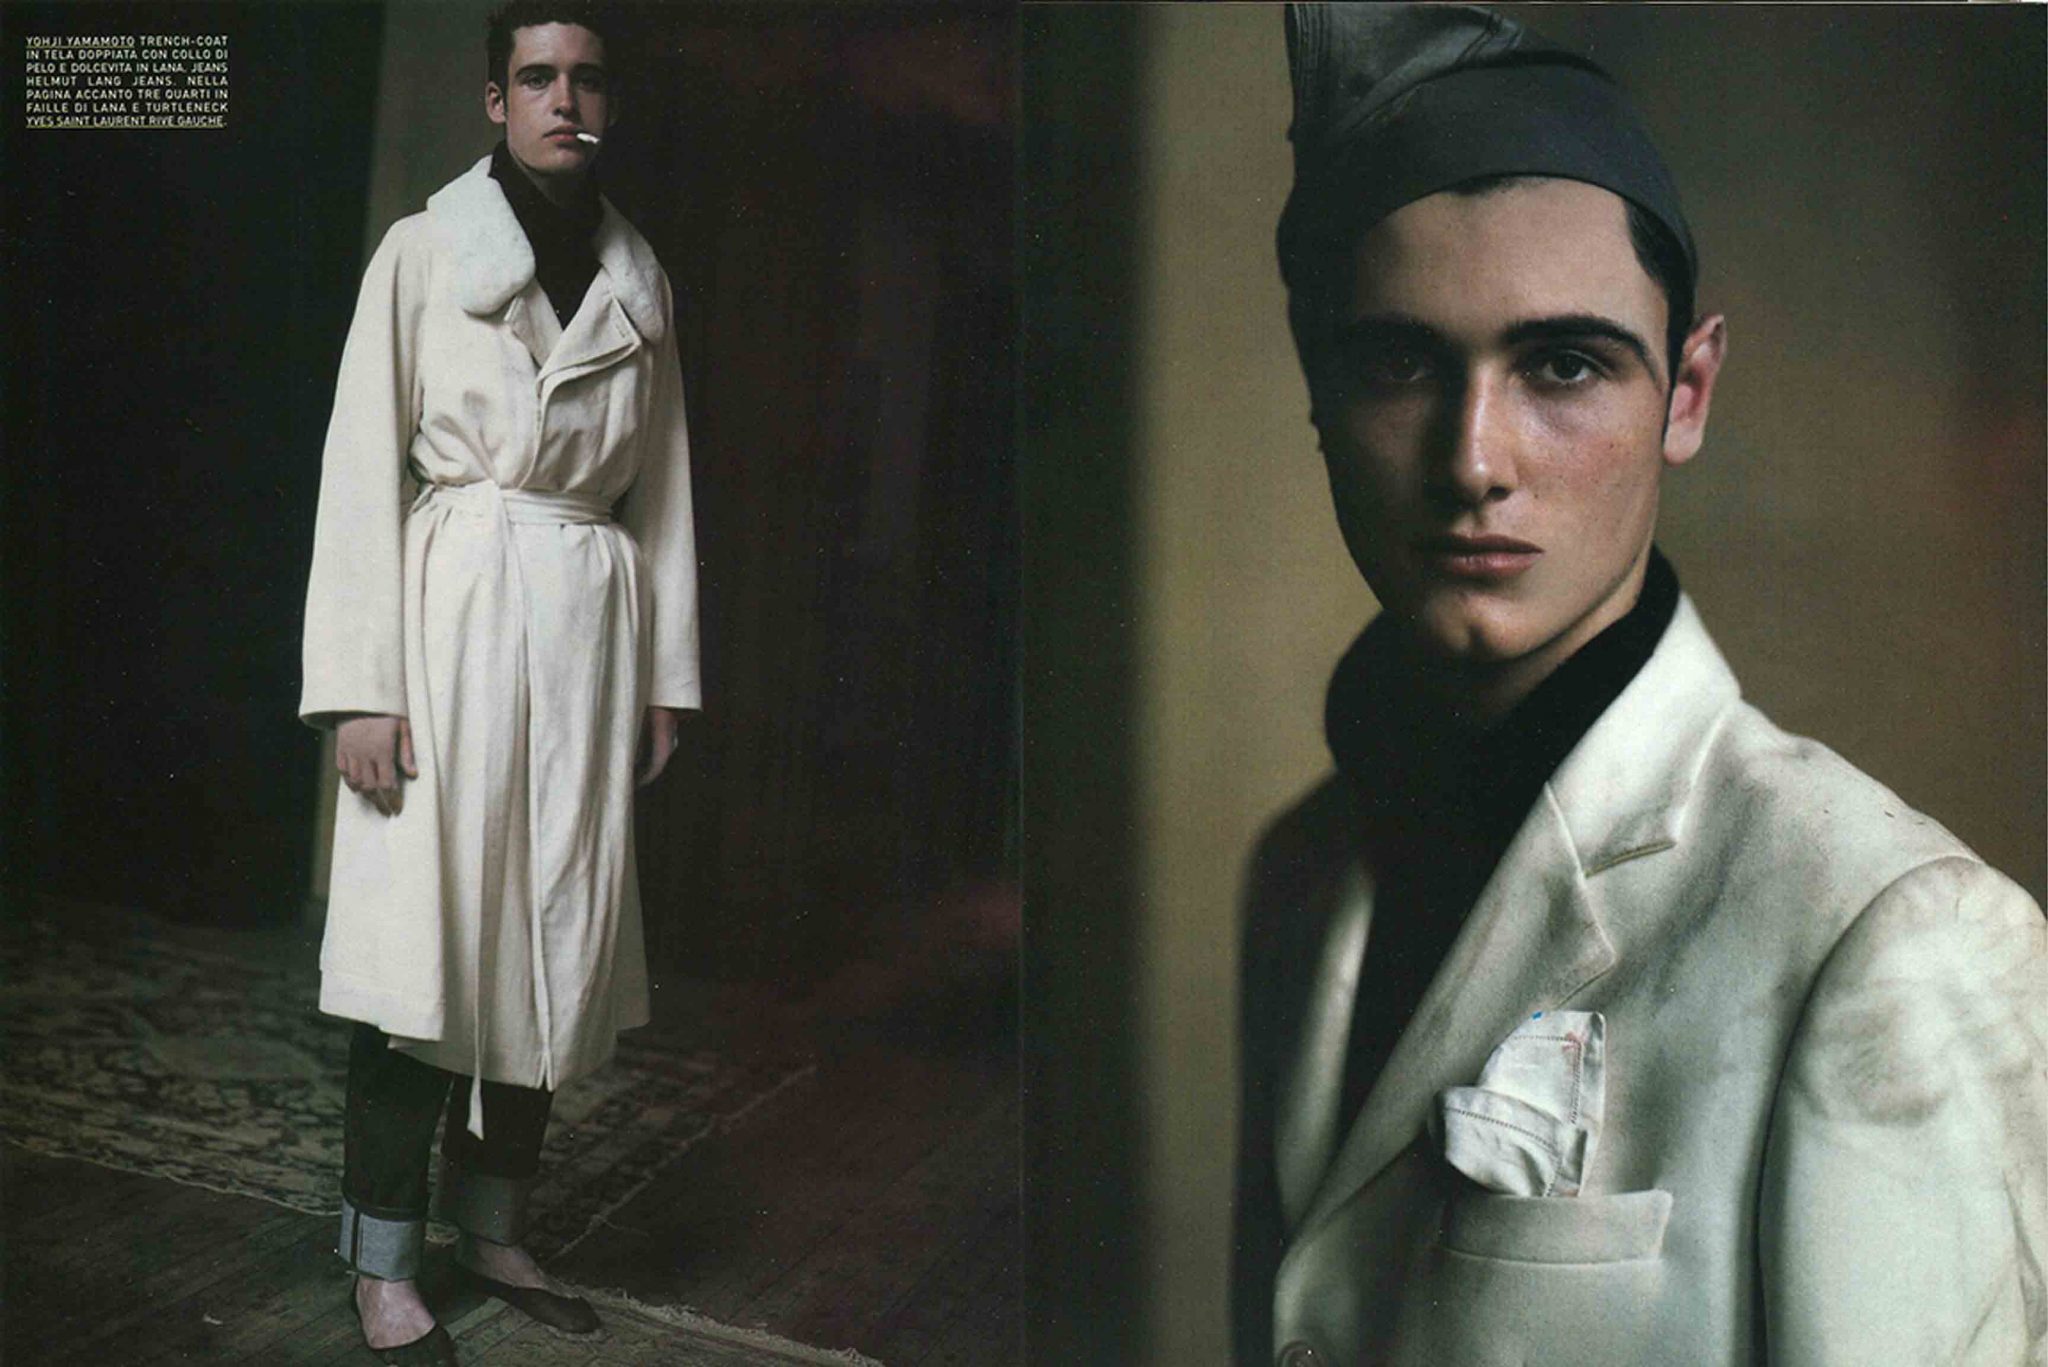 Paul Sinclaire | L'Uomo Vogue by Paolo Roversi | 3